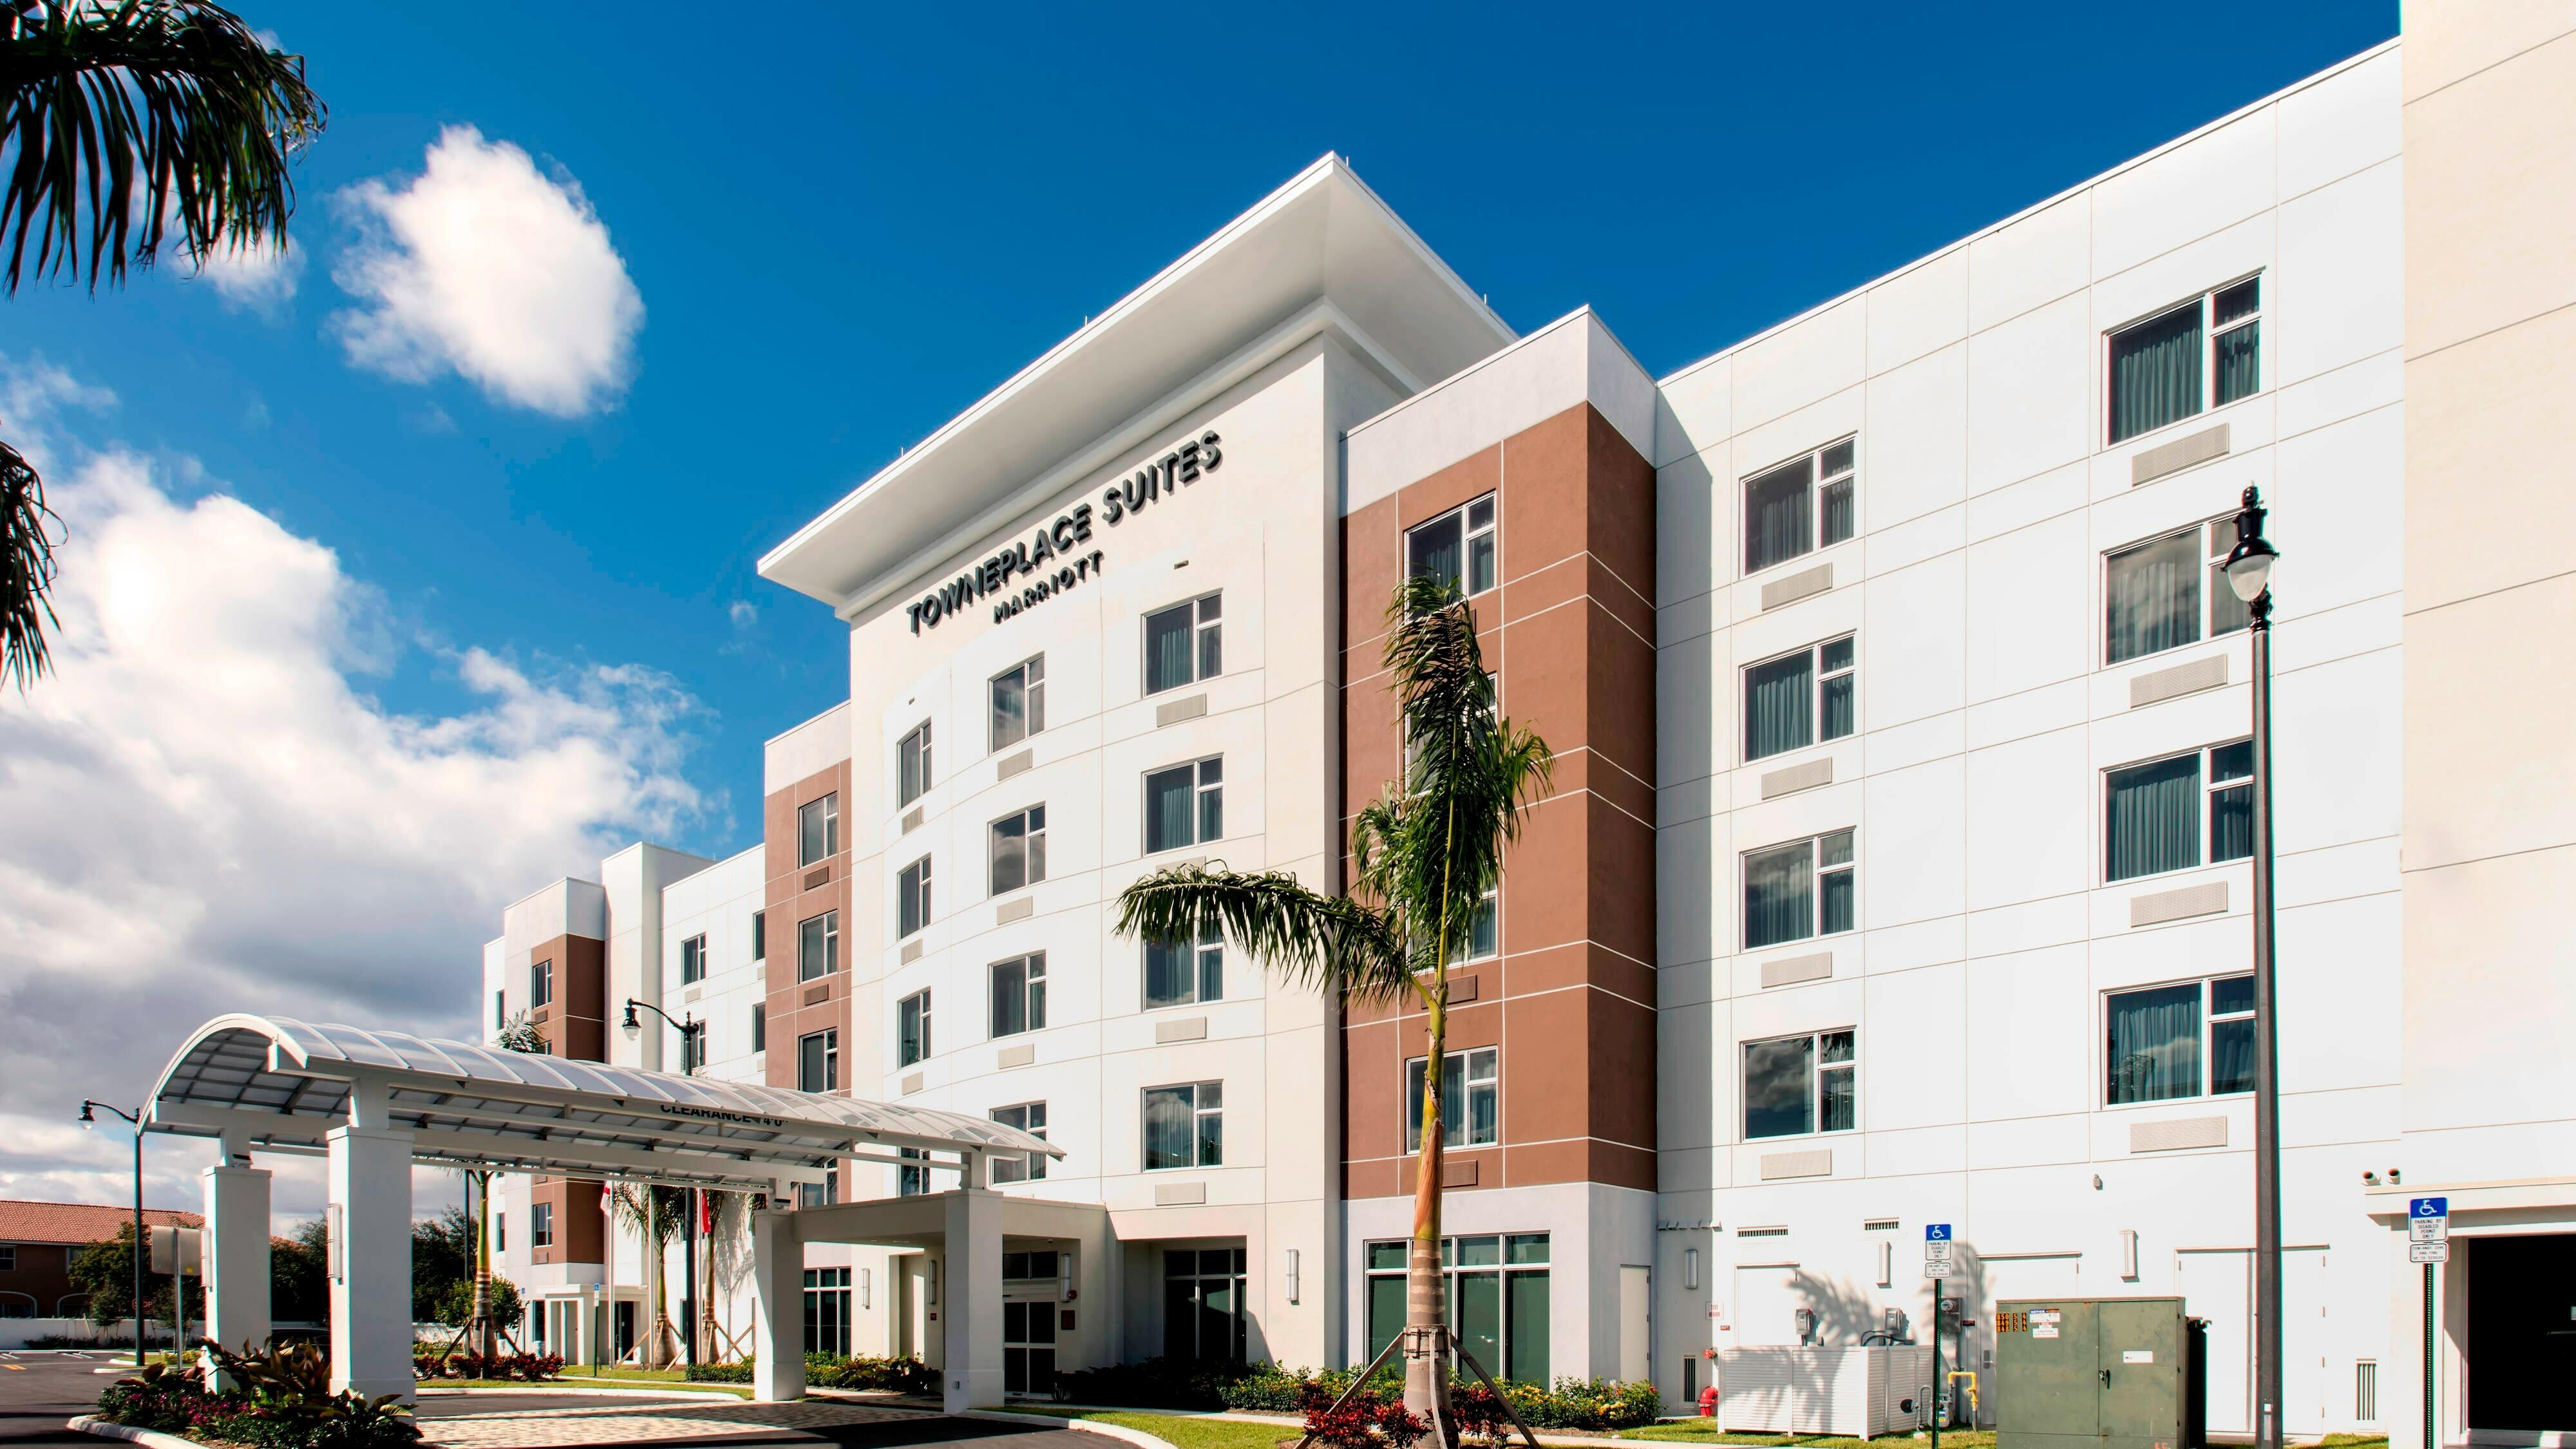 Photo of TownePlace Suites by Marriott Miami Homestead, Homestead, FL